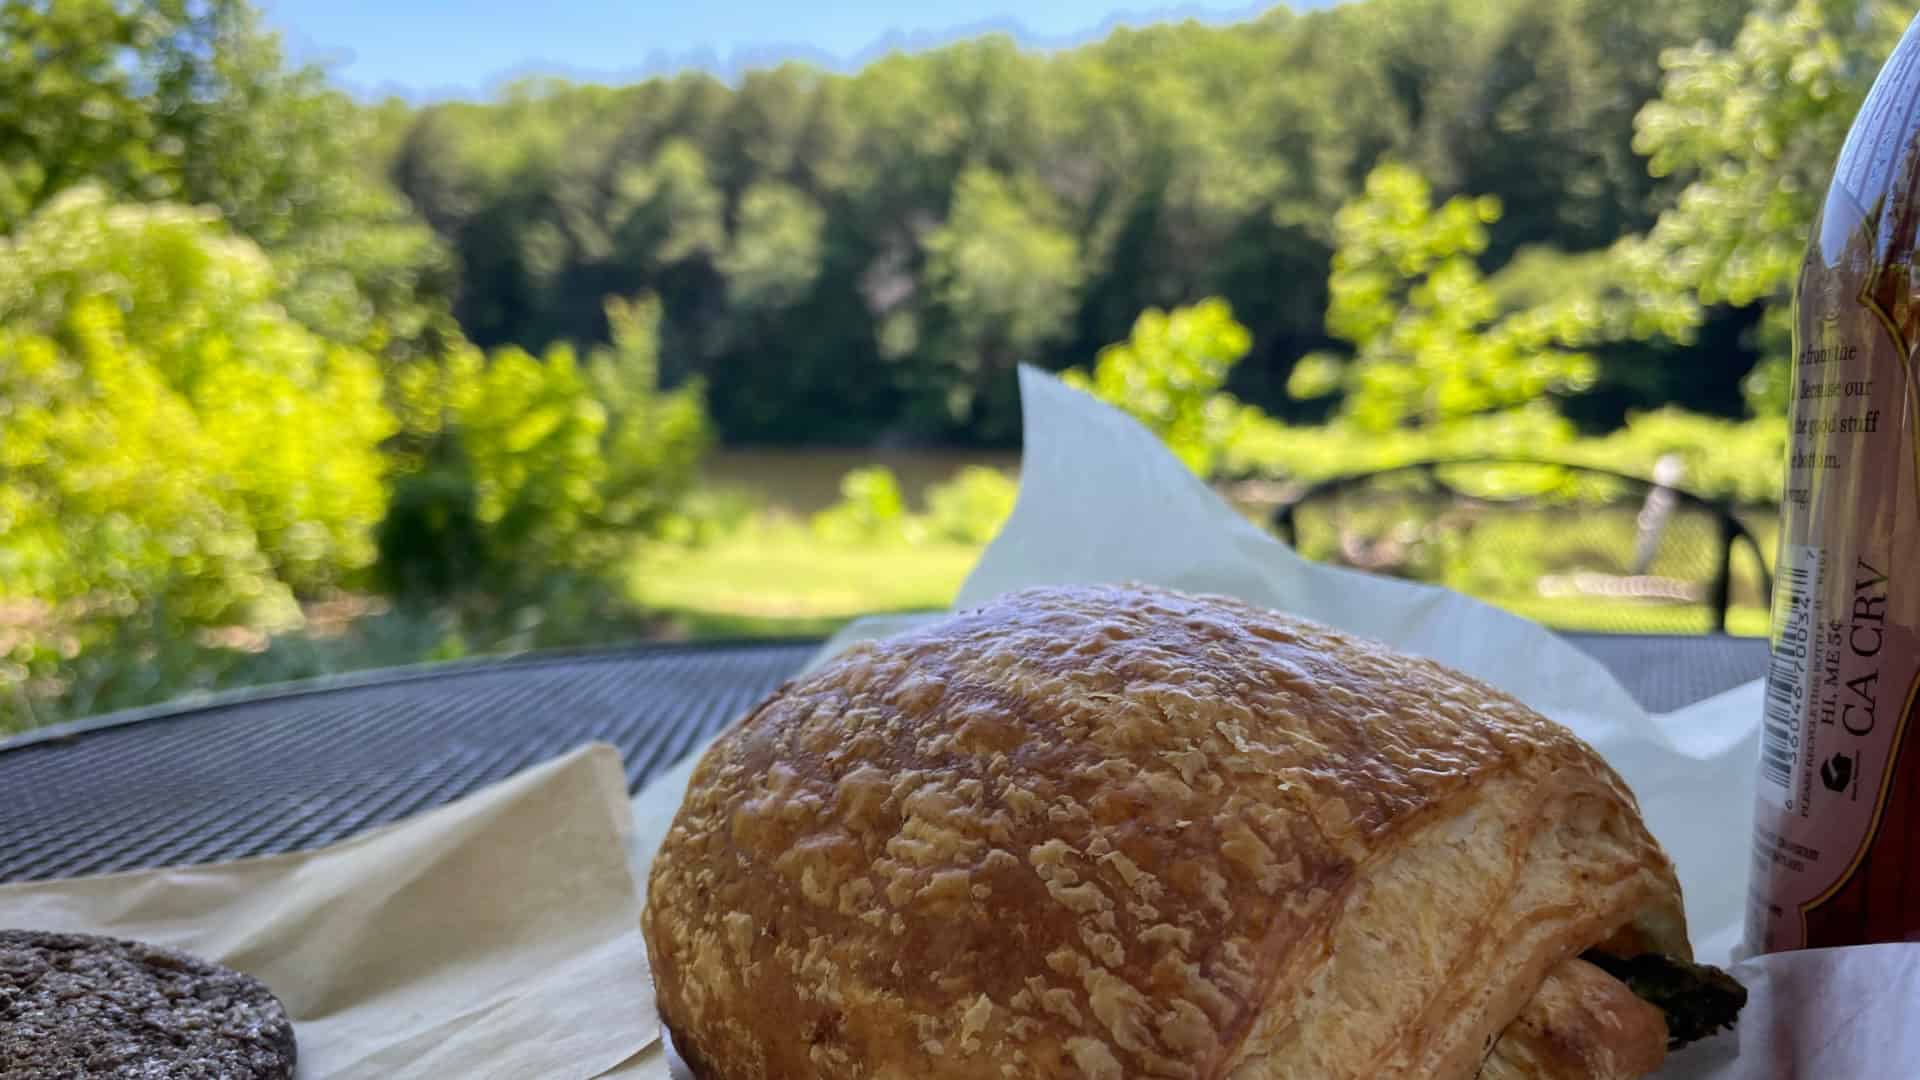 A croissant from Berkshire Mountain Bakery rests on a table in the sun on the bank of the Housatonic River.